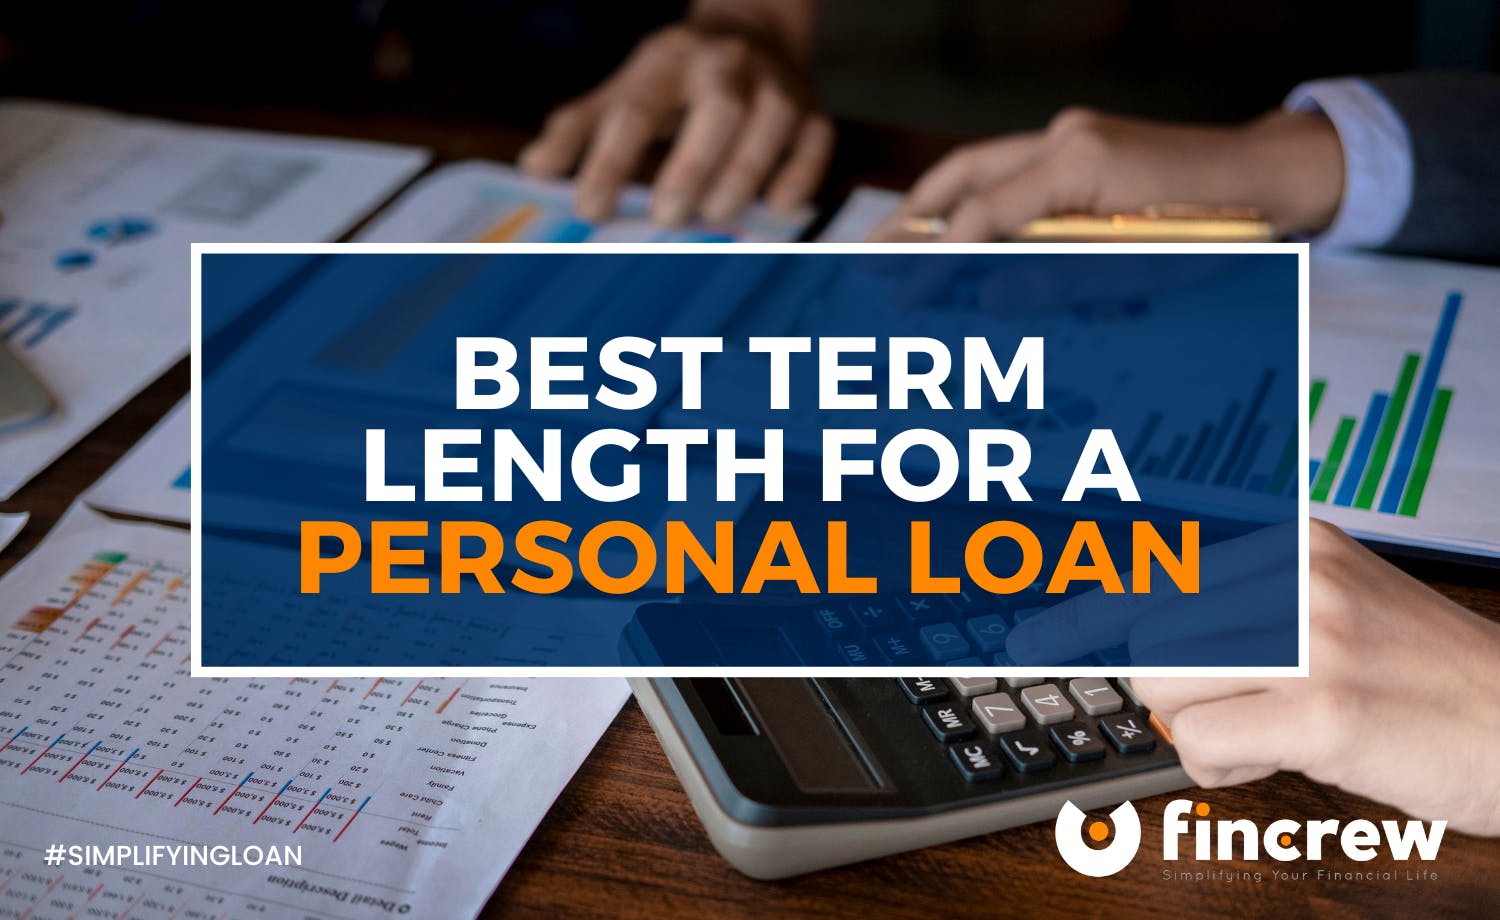 Best Term Length For a Personal Loan